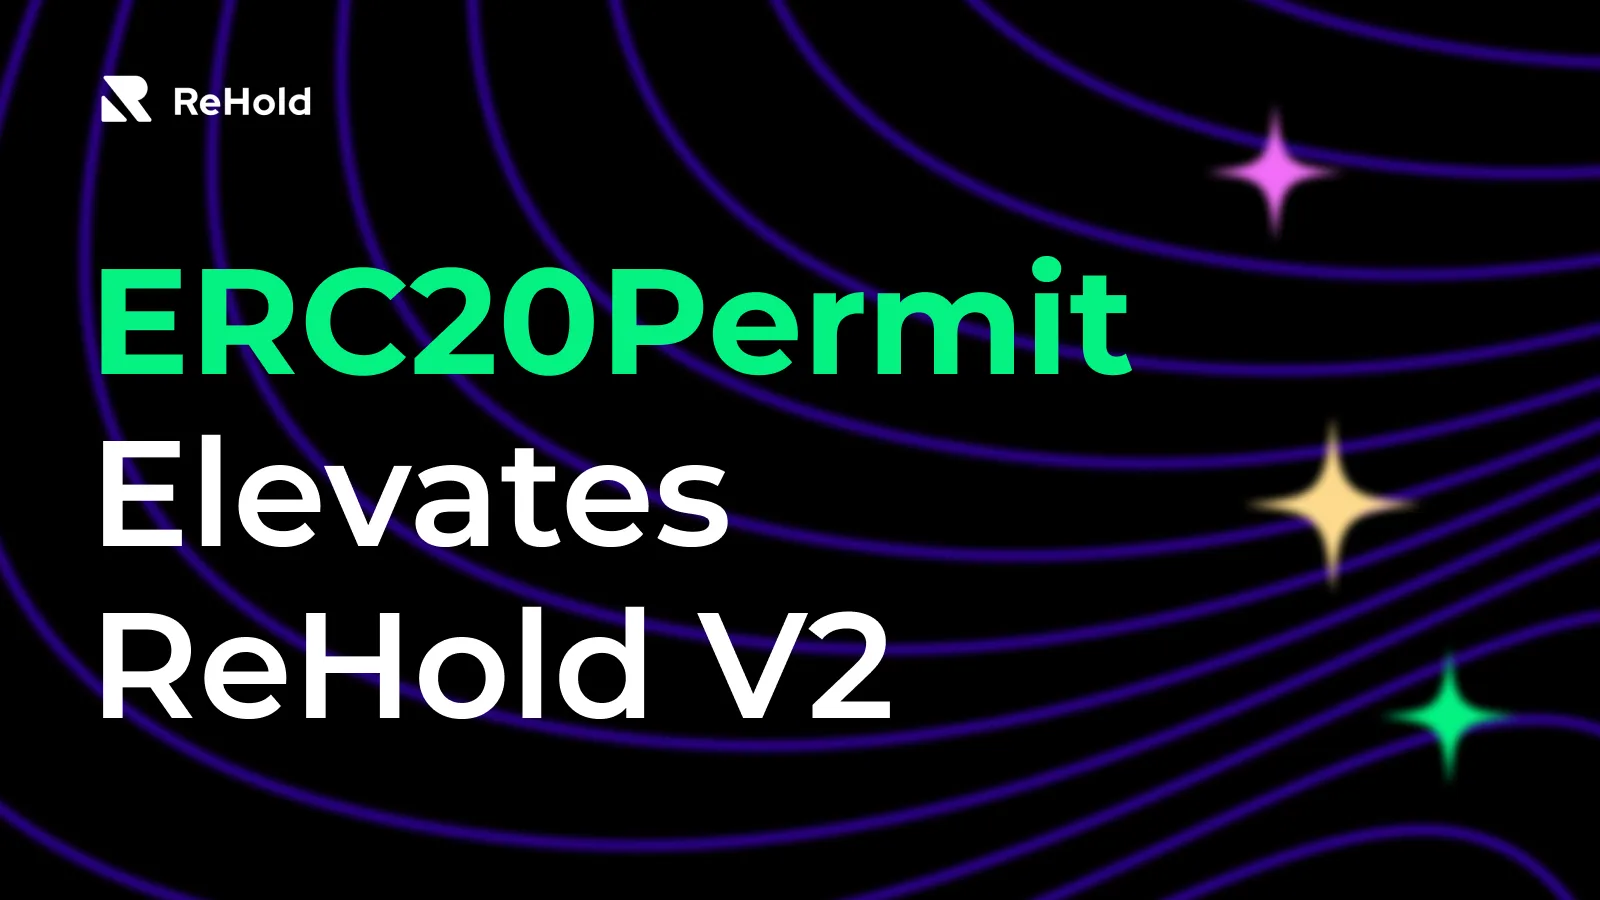 ReHold Integrates ERC20Permit for Enhanced User Experience